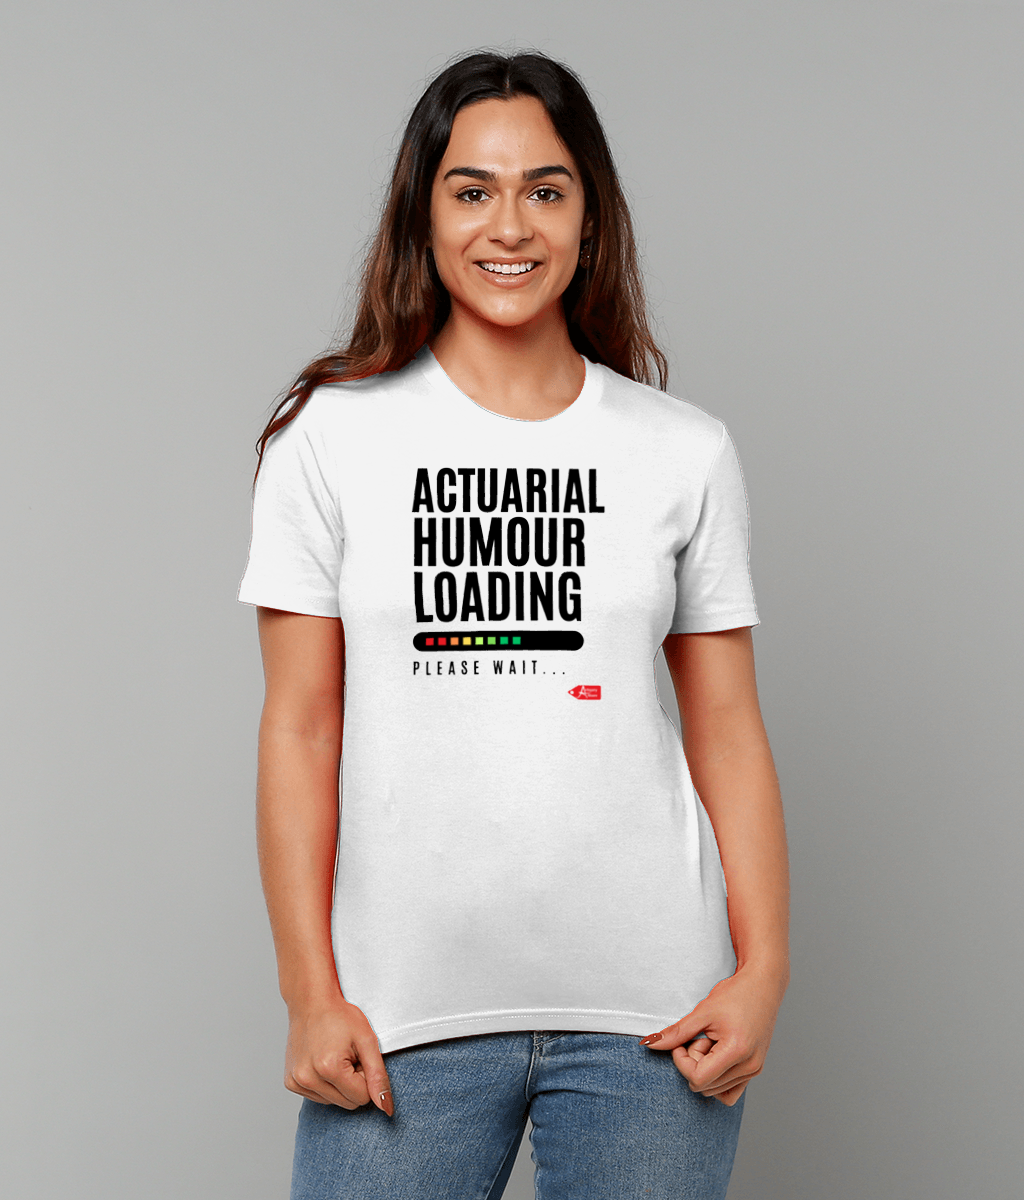 Actuarial Humour Loading T-shirt